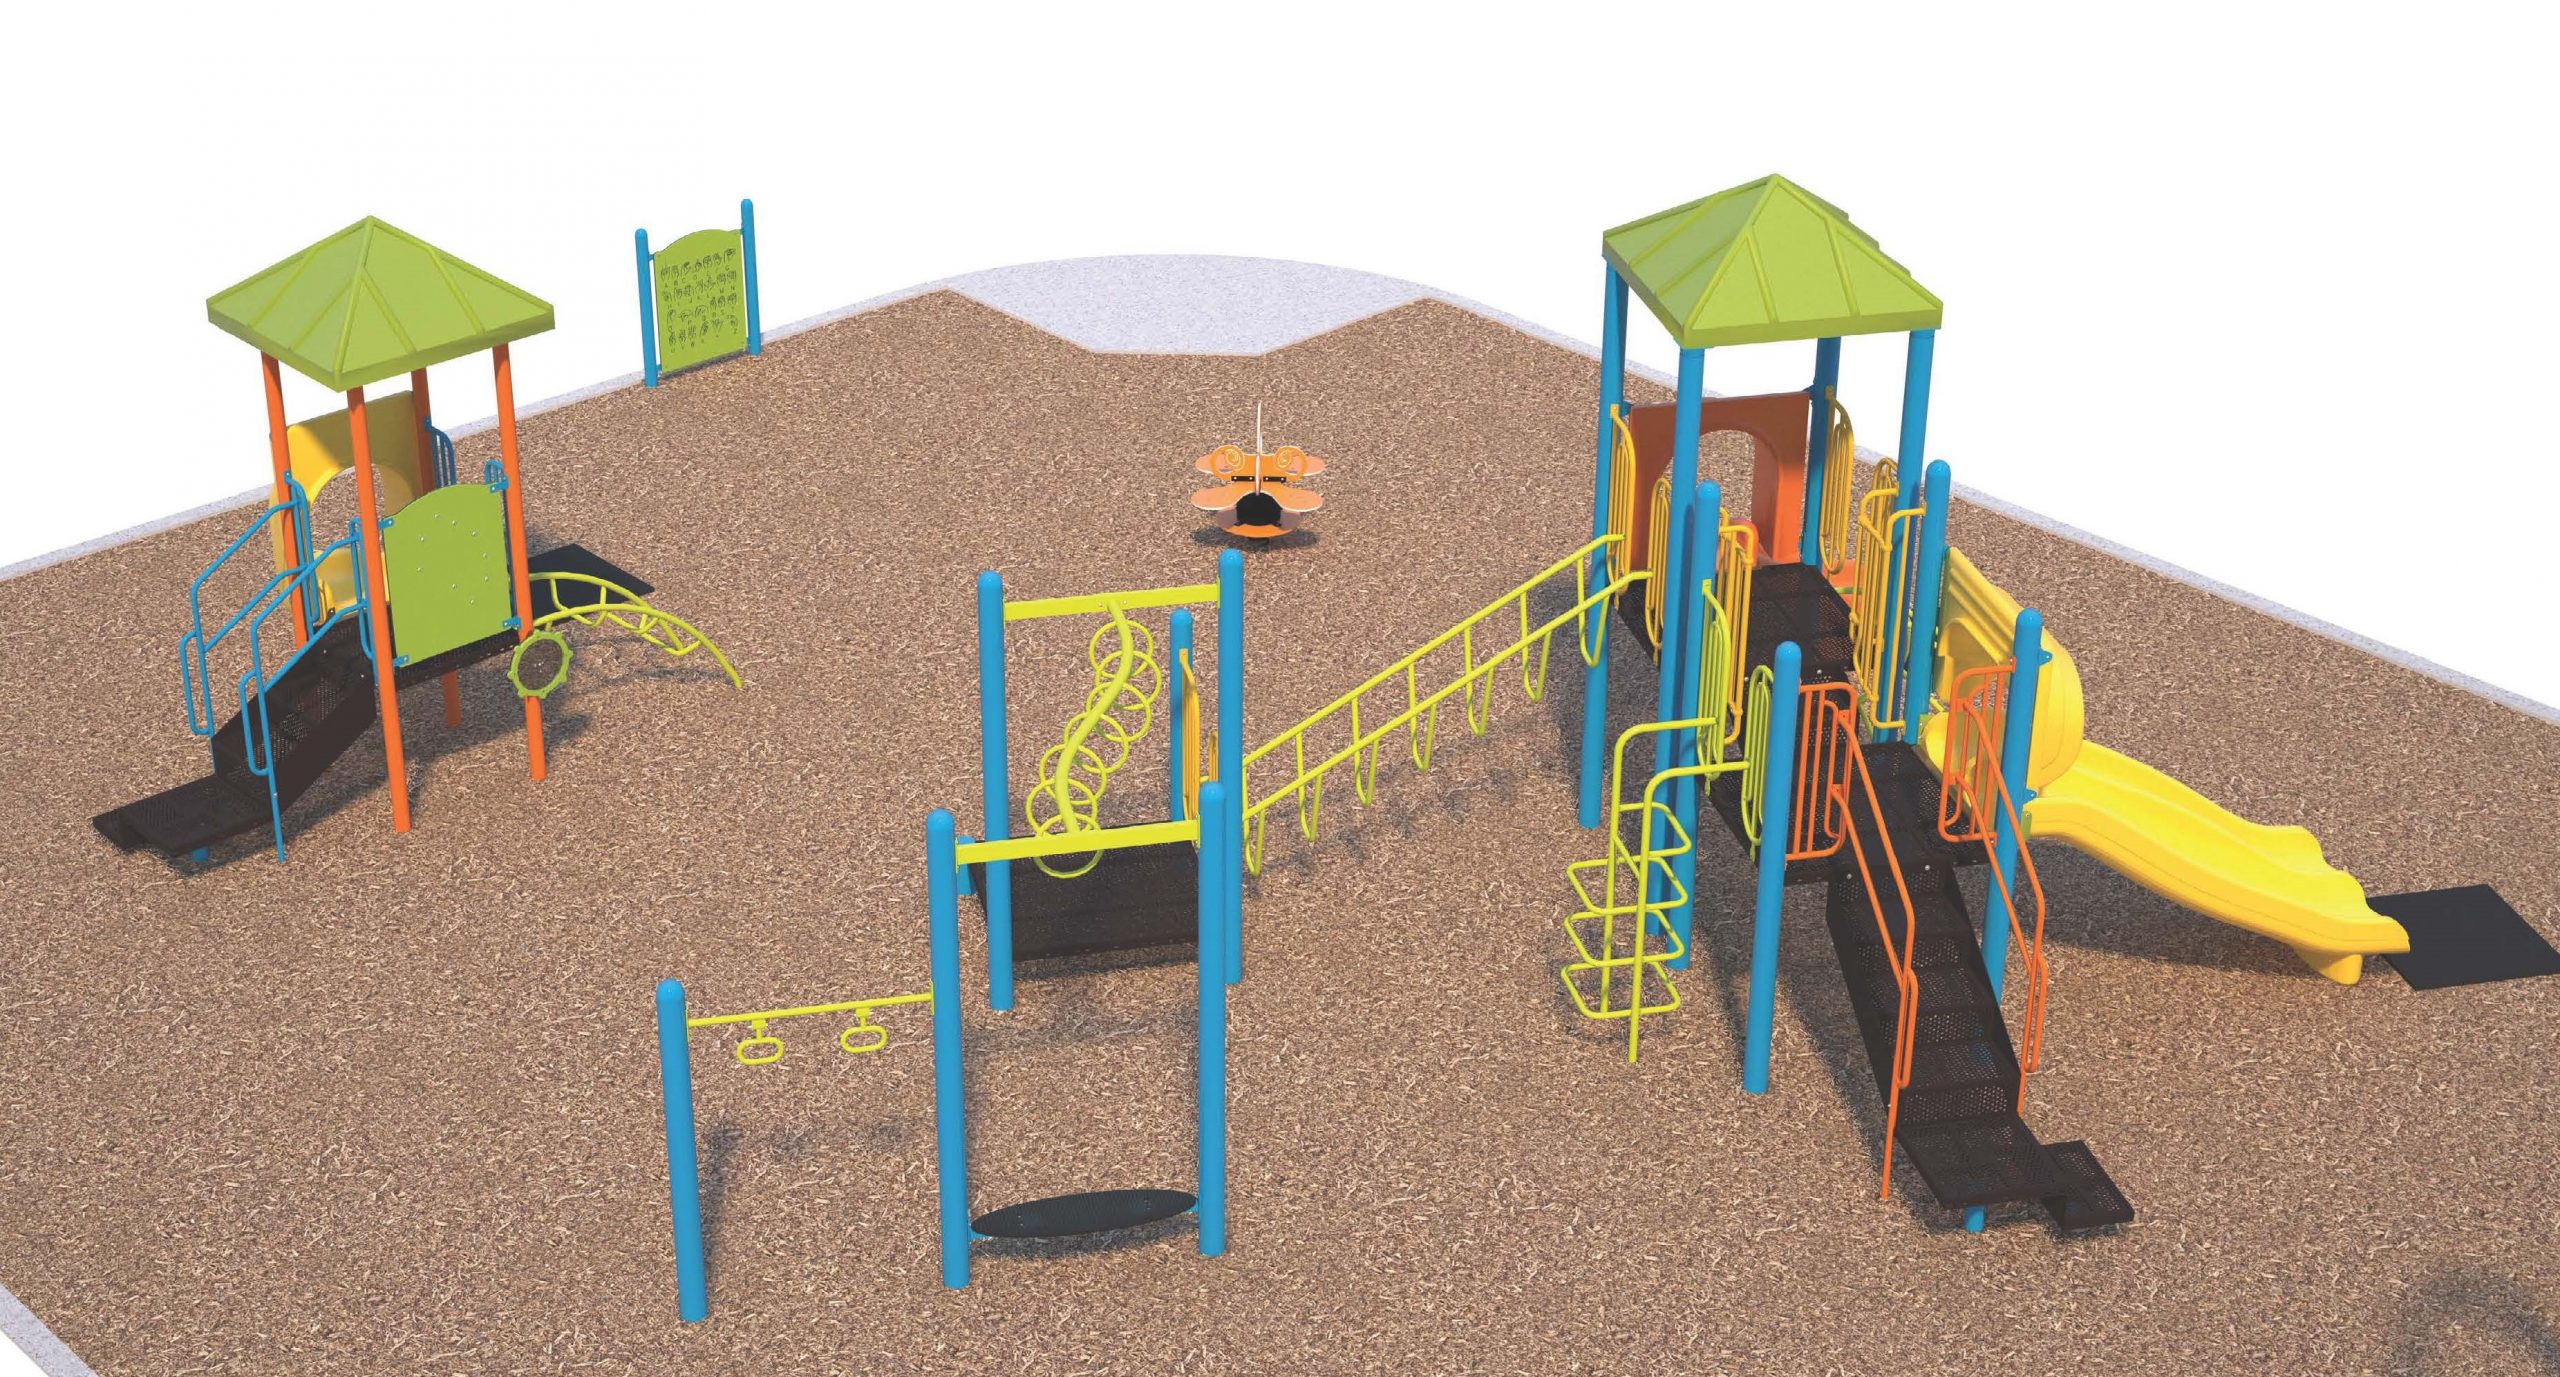 This rendering is a birds eye view of the senior climber, junior climber, octopus multi-person spring toy, and ground level activity panel. Visible on the senior climber are the blue posts, hanging features (yellow monkey bars and rings), several climbing features in yellow, stairs and transfer stations, the yellow double slide and green roof. Visible on the junior climber are the orange posts, a green activity panel, yellow climbing feature, stairs, and green roof. The ground level activity panel is green with the alphabet in letters and sign language